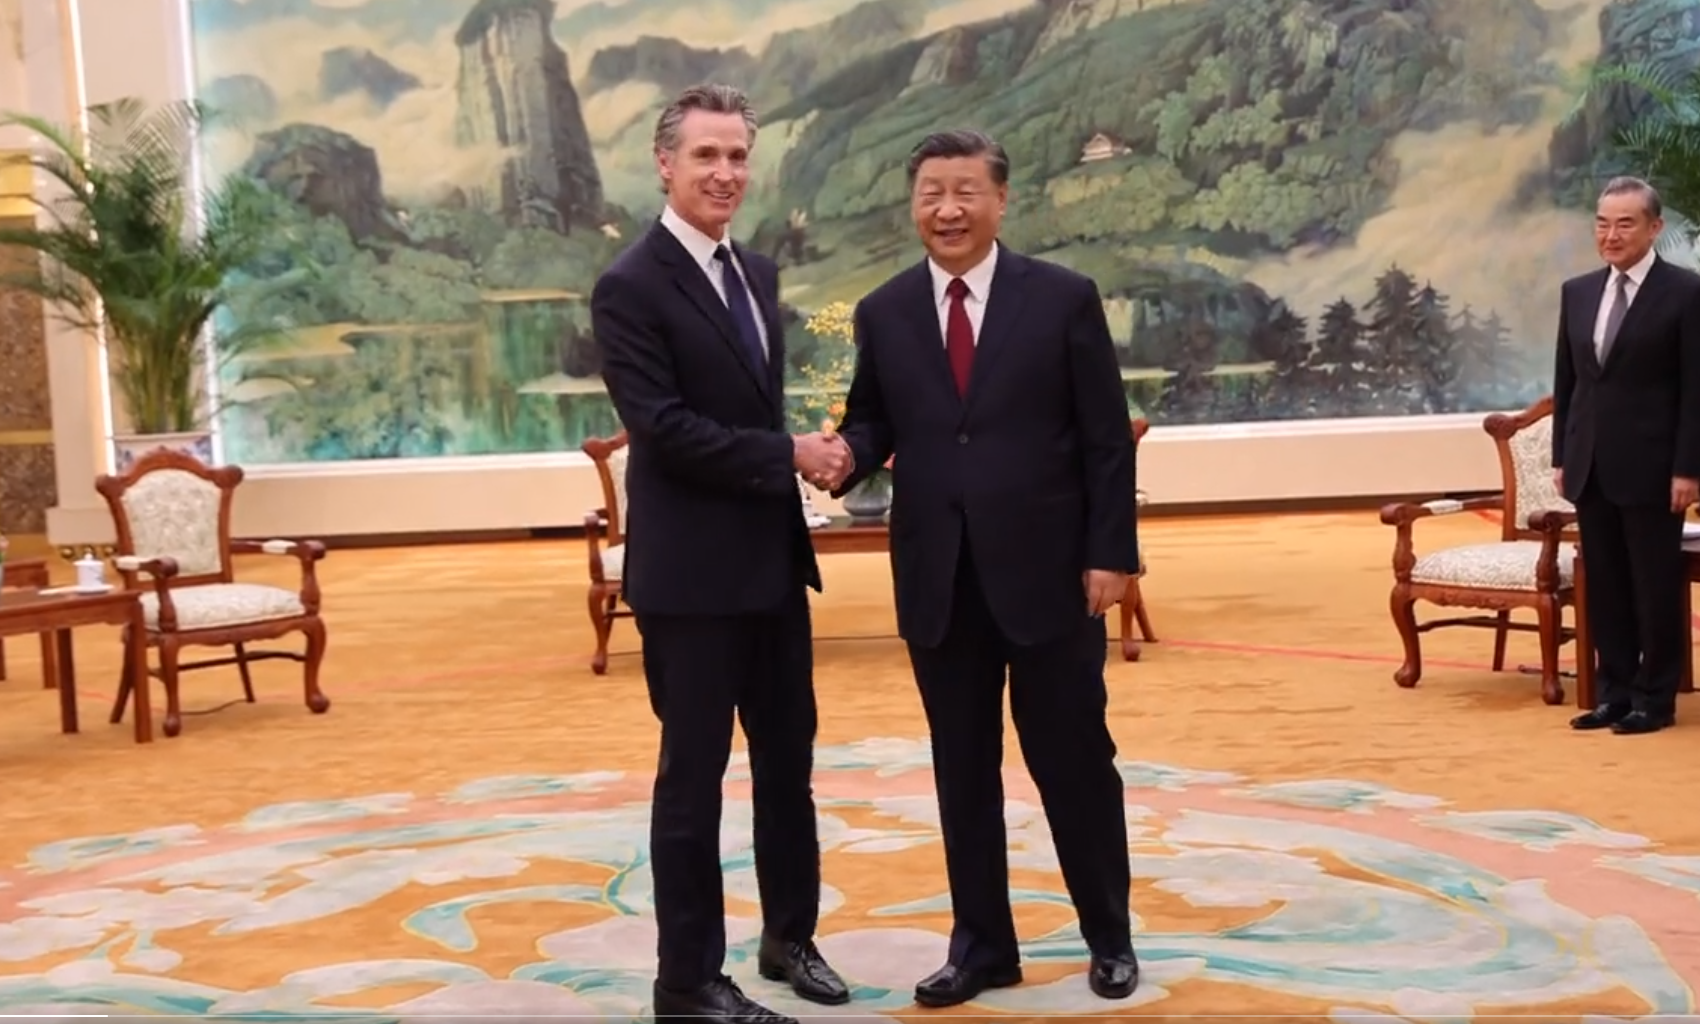 Two Weeks Before Debate With DeSantis, Newsom Visits China And Meets With Xi